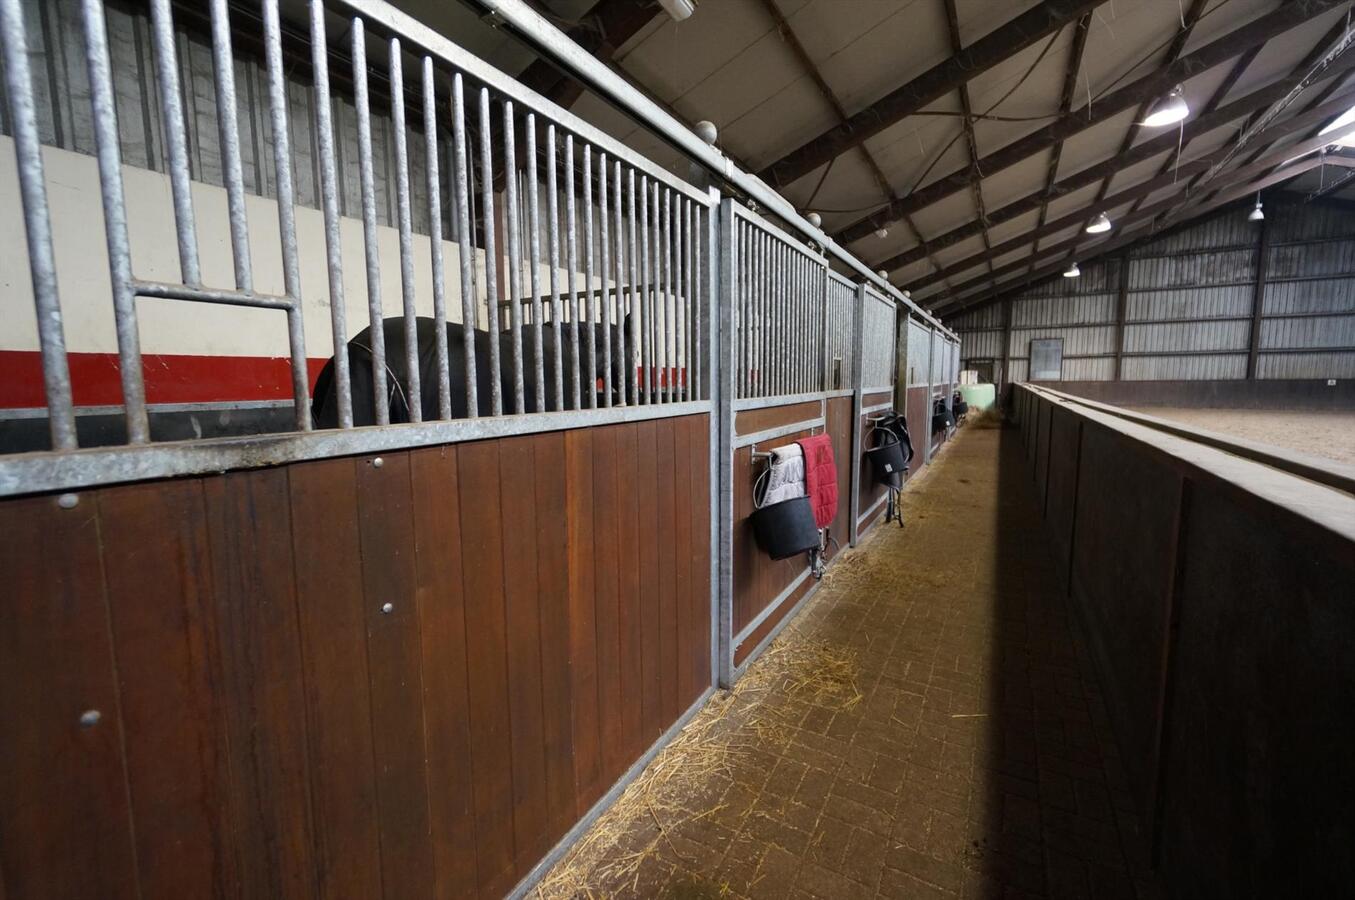 Equestrian complex on approximately 3,4 ha in Nuenen (North-Brabant NL) 